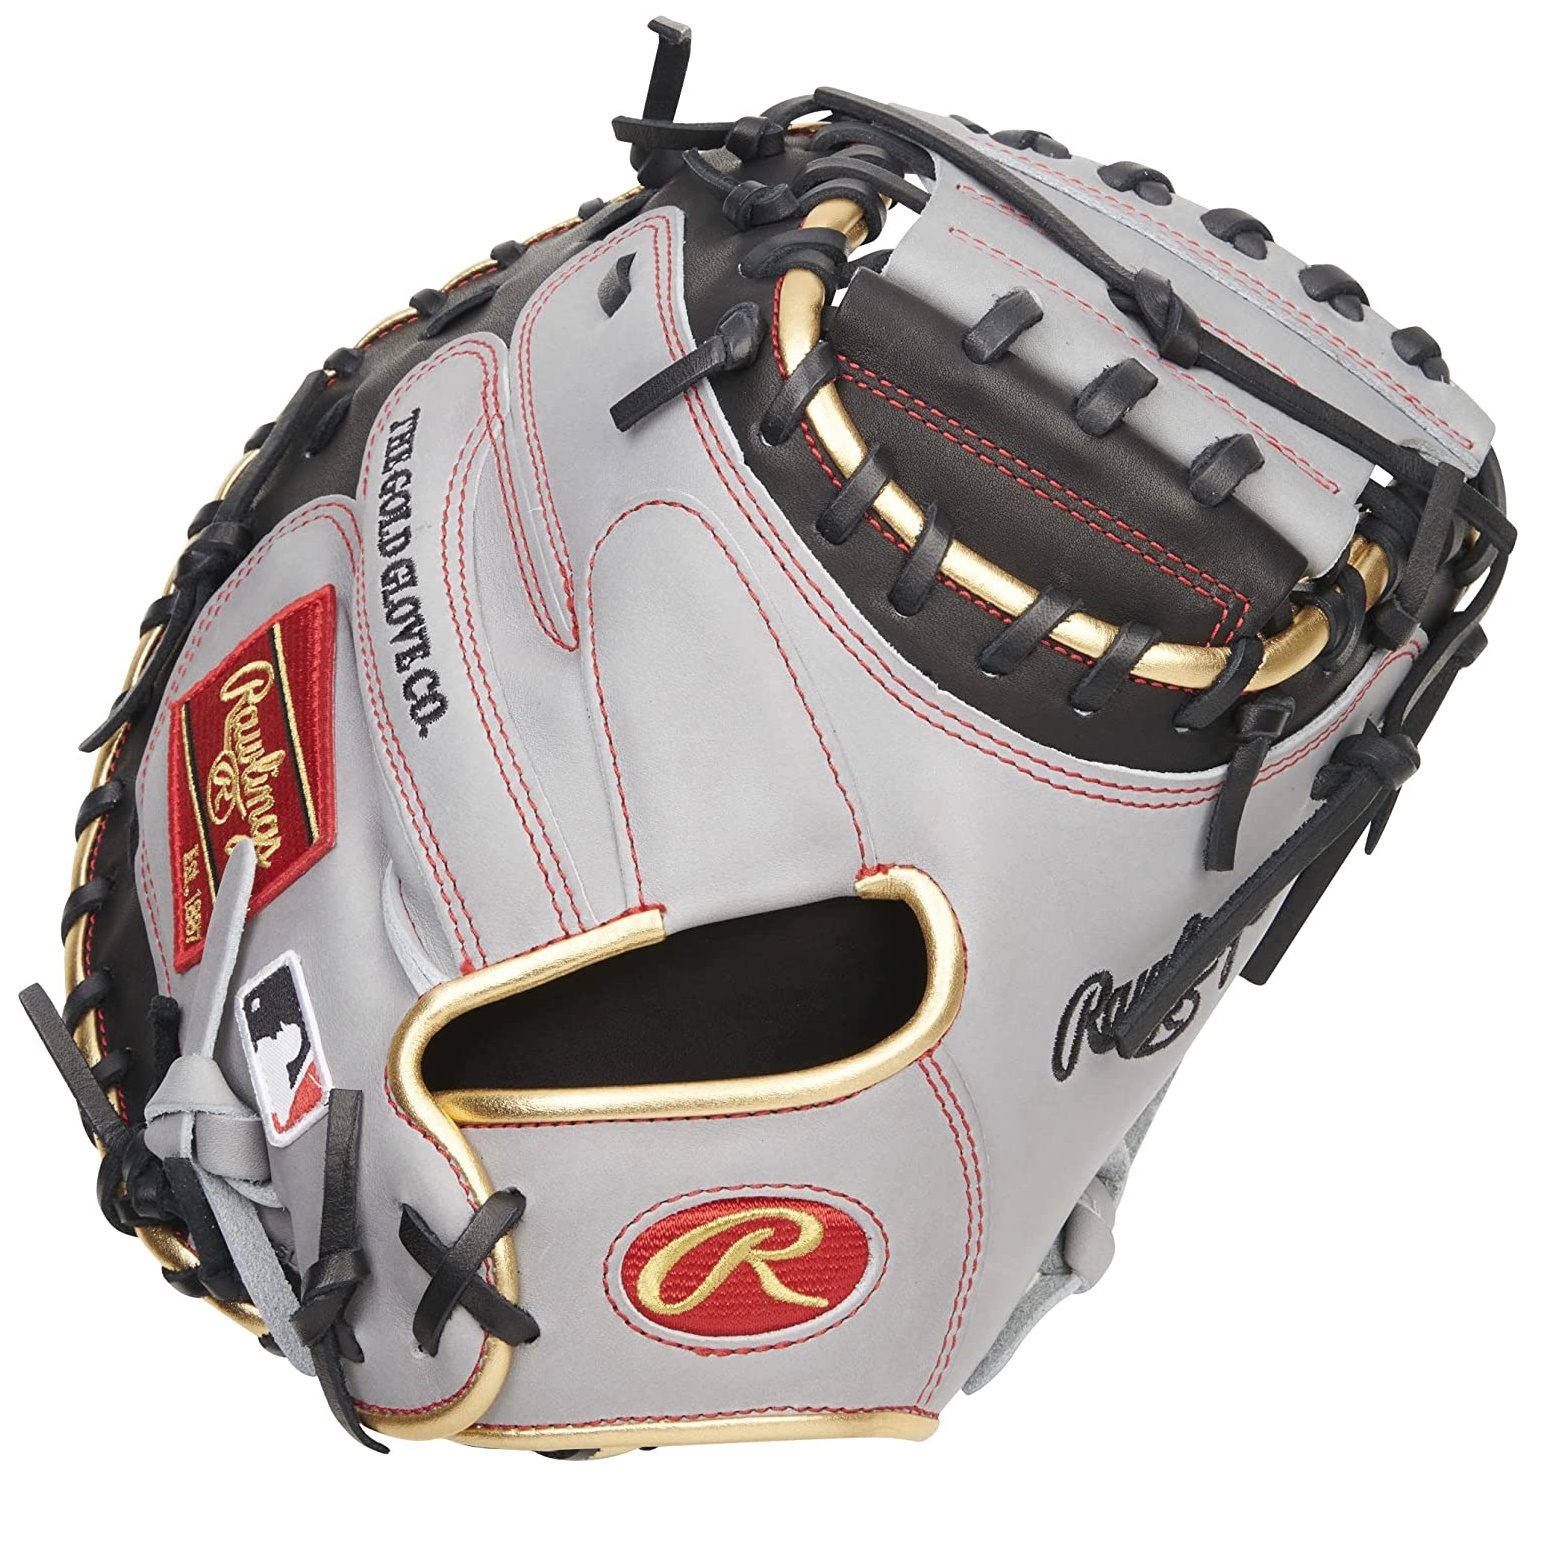 Constructed from Rawlings' world-renowned Heart of the Hide steer leather. Taken exclusively from hand selected pro-grade hides, Heart of the Hide leather is ultra-durable & renowned for forming the perfect pocket. Made from high-quality leather, Heart of the Hide gloves are cut from the top 5% of all Rawlings US steer hide to provide unbeatable structure.